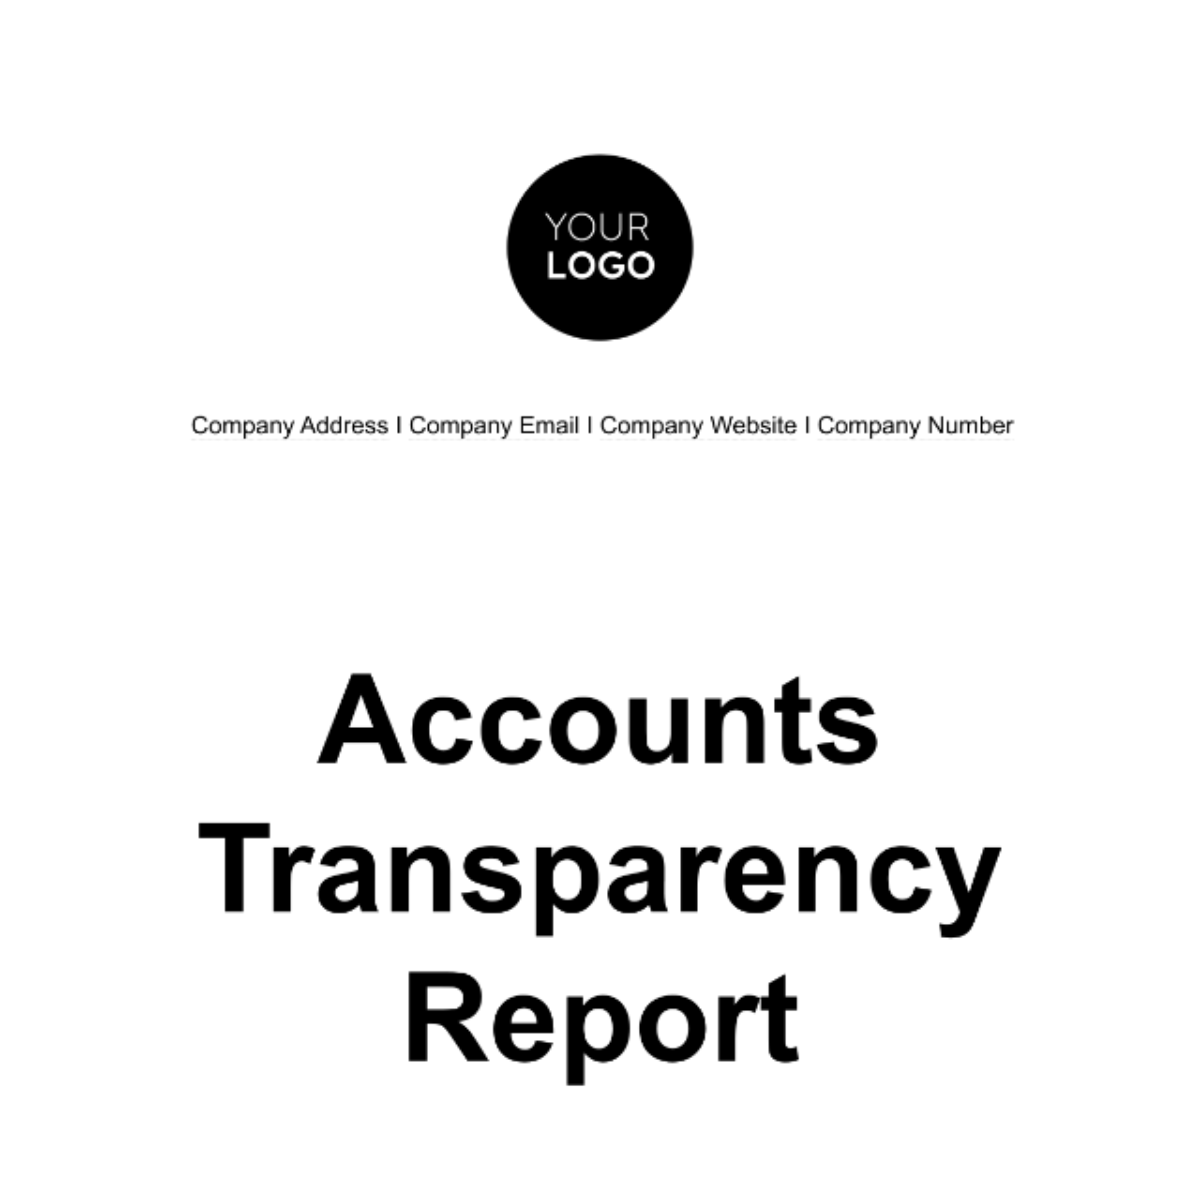 Accounts Transparency Report Template